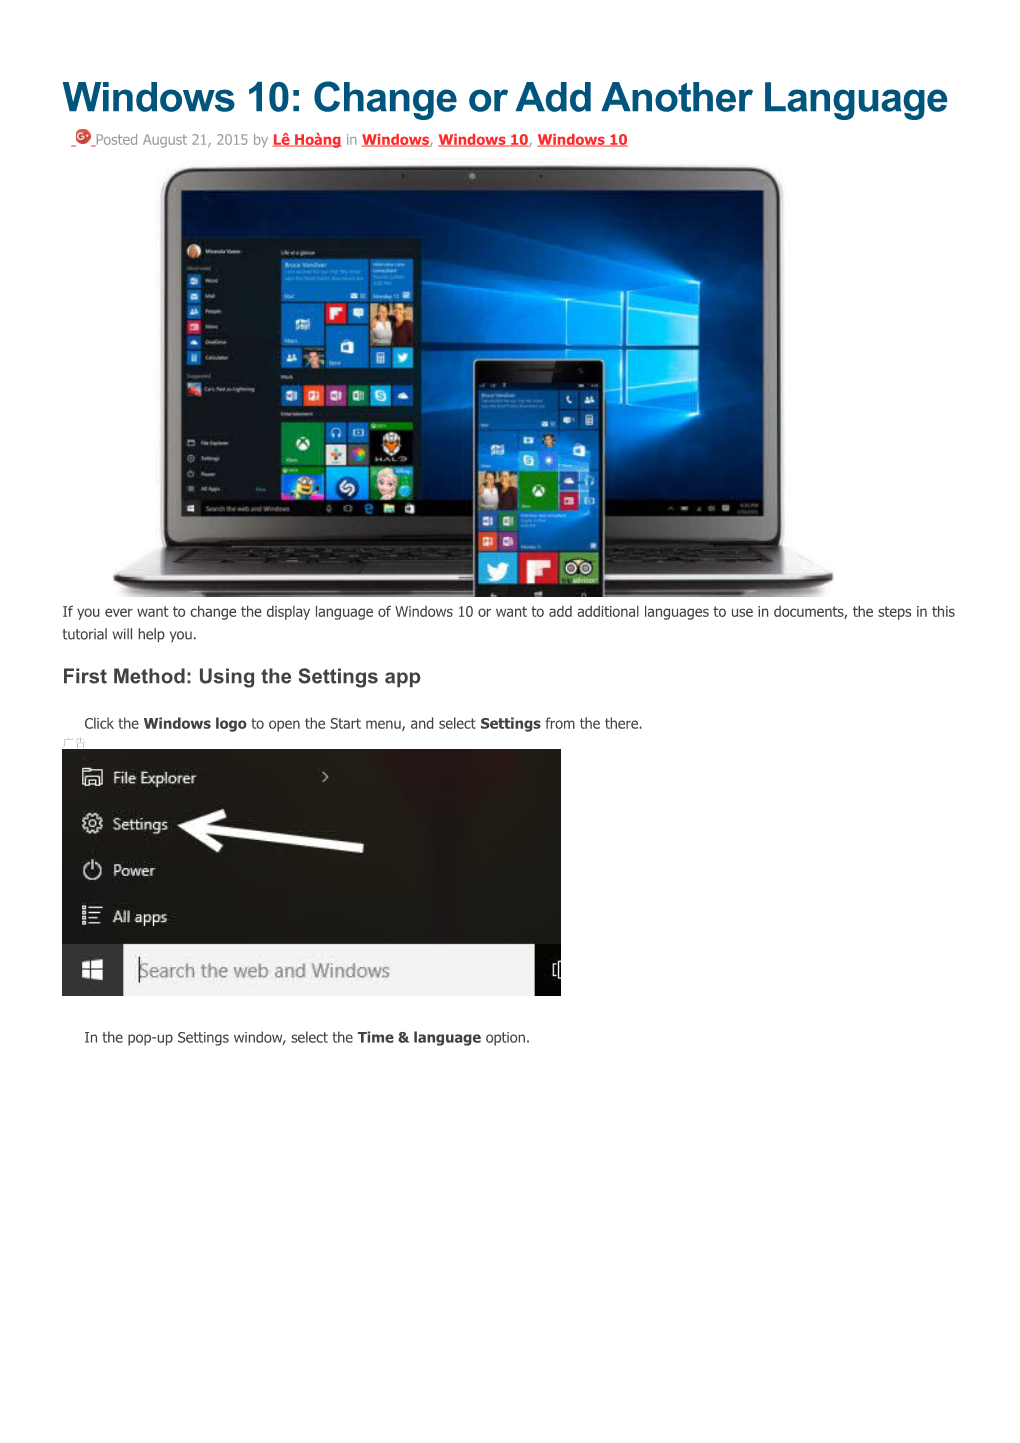 Windows 10: Change Or Add Another Language